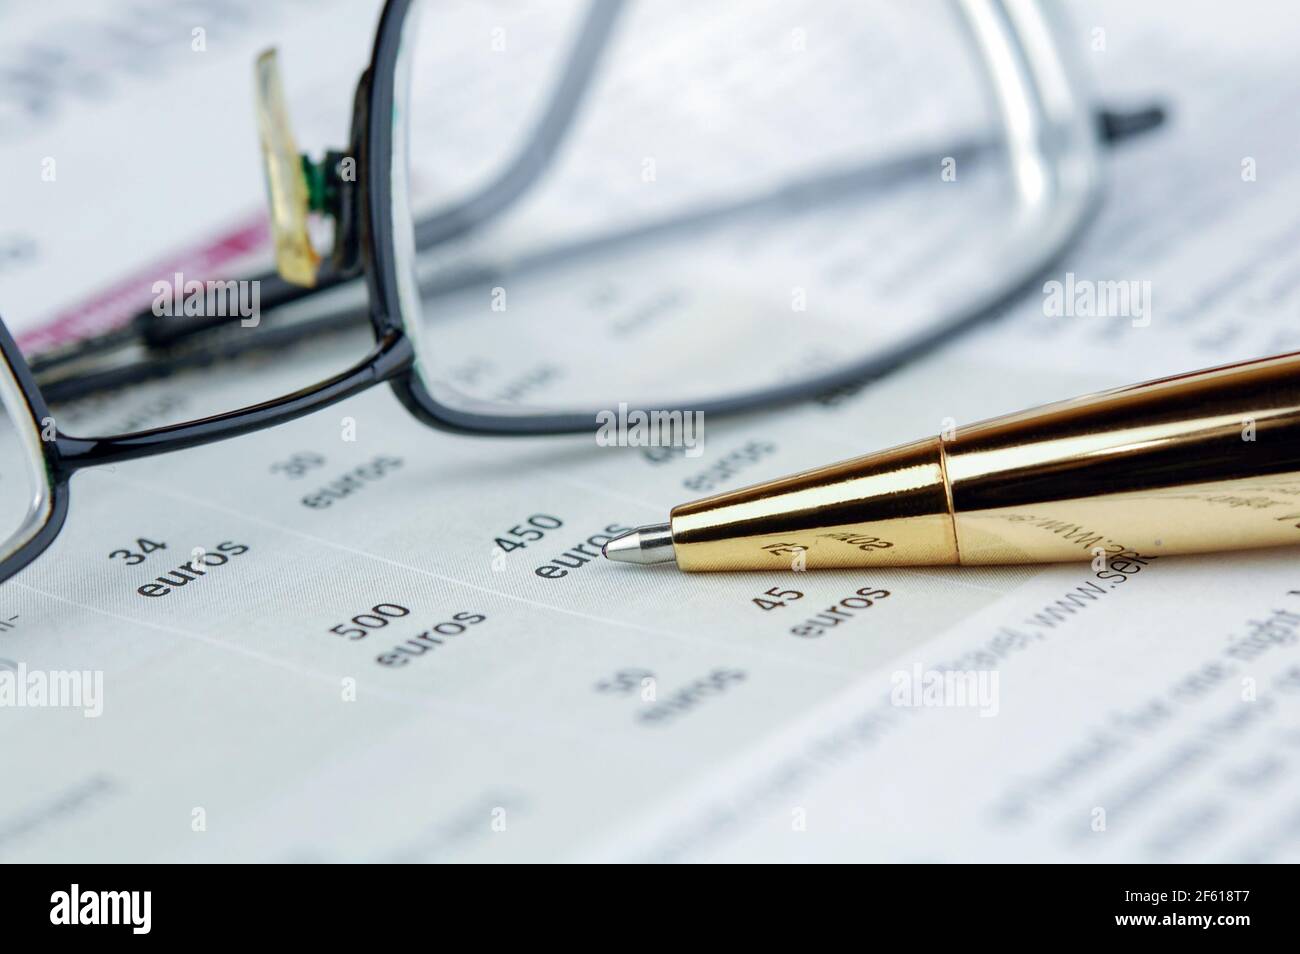 Glasses and pen lie on a newspaper. Analysis and Success concept. Business analytic and forecasting concept. Stock Photo